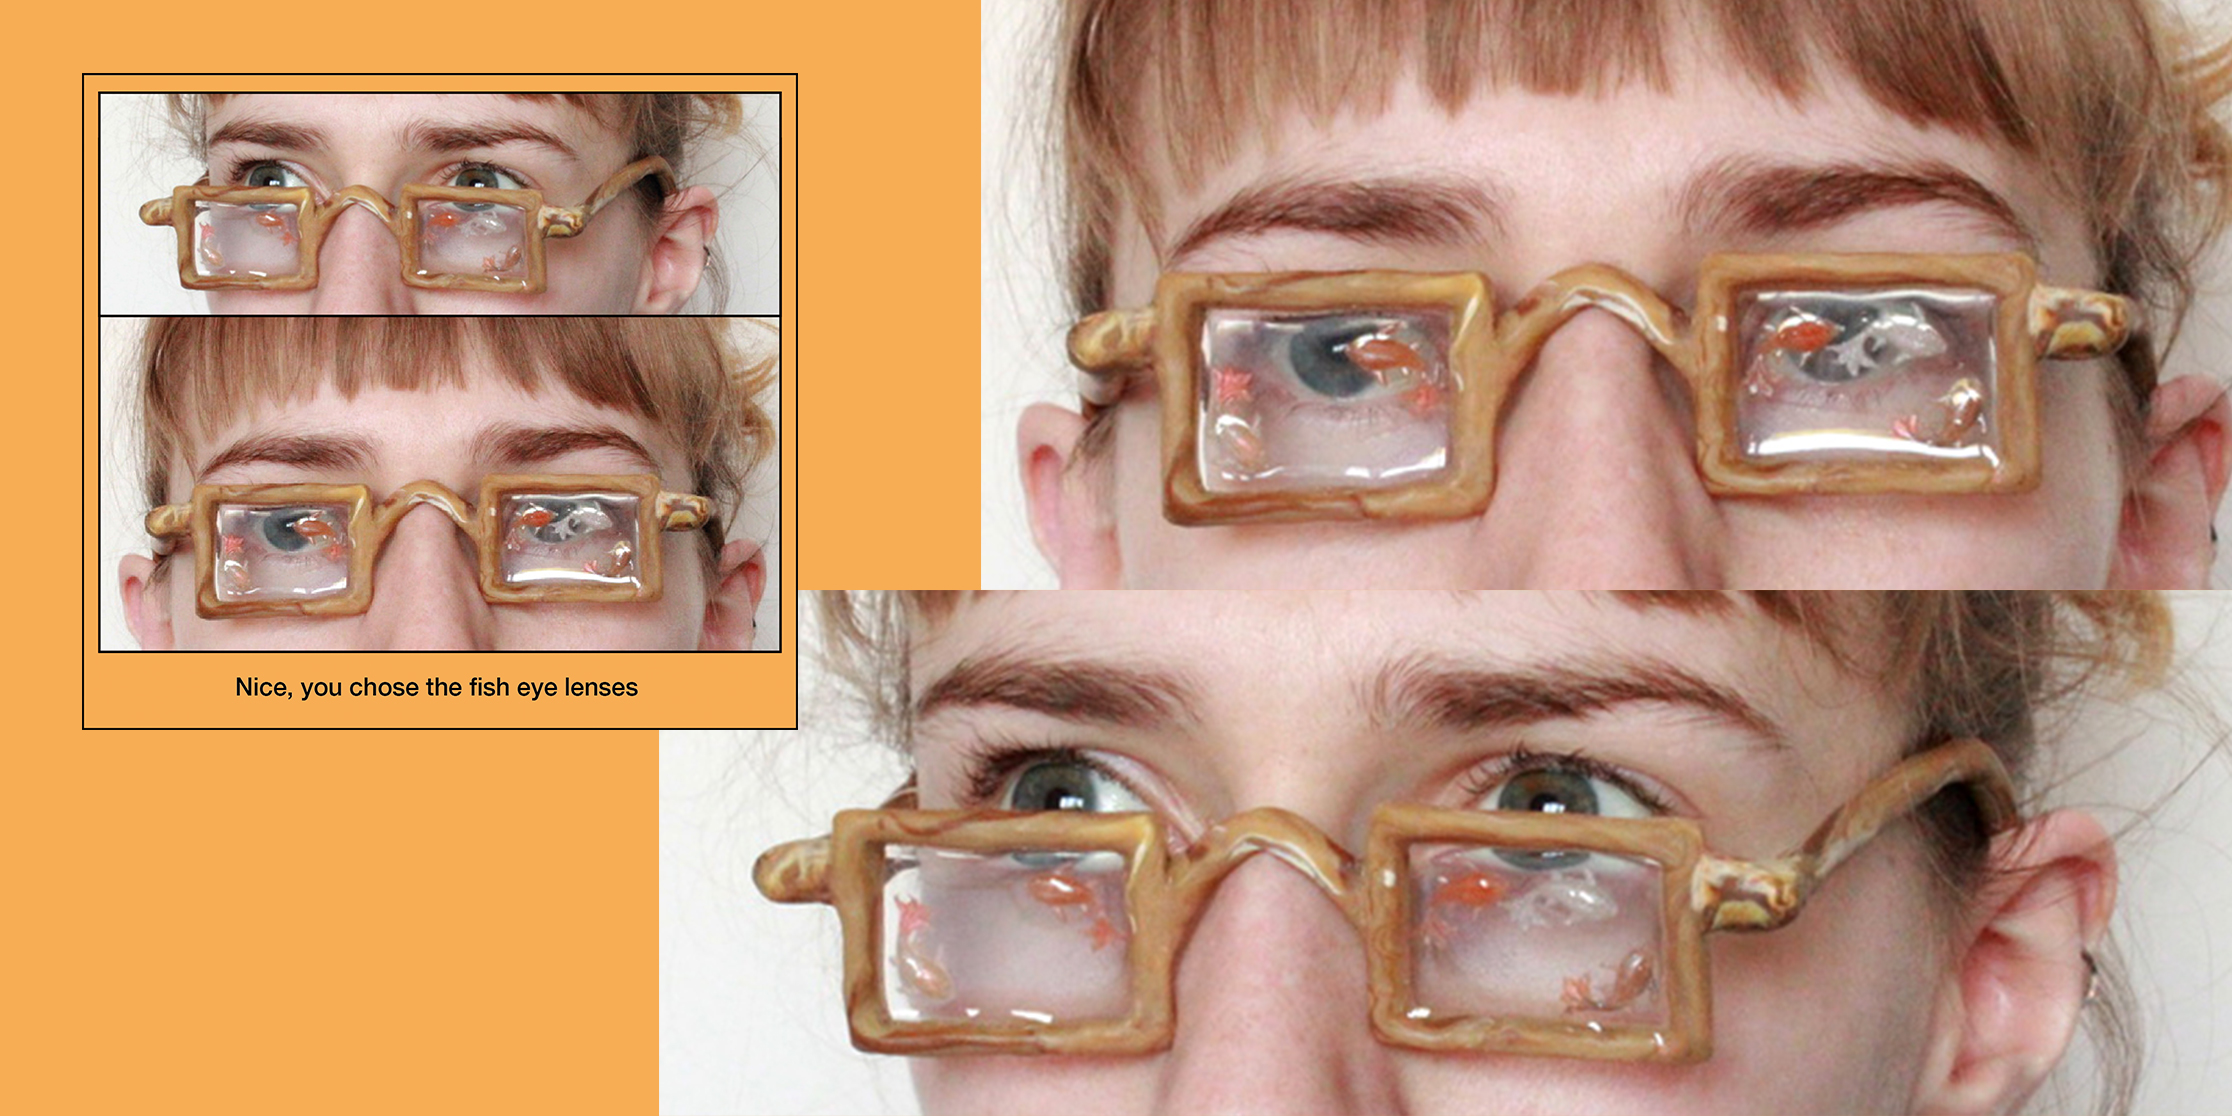 Photographs of someone wearing glasses with fish swimming in the lenses